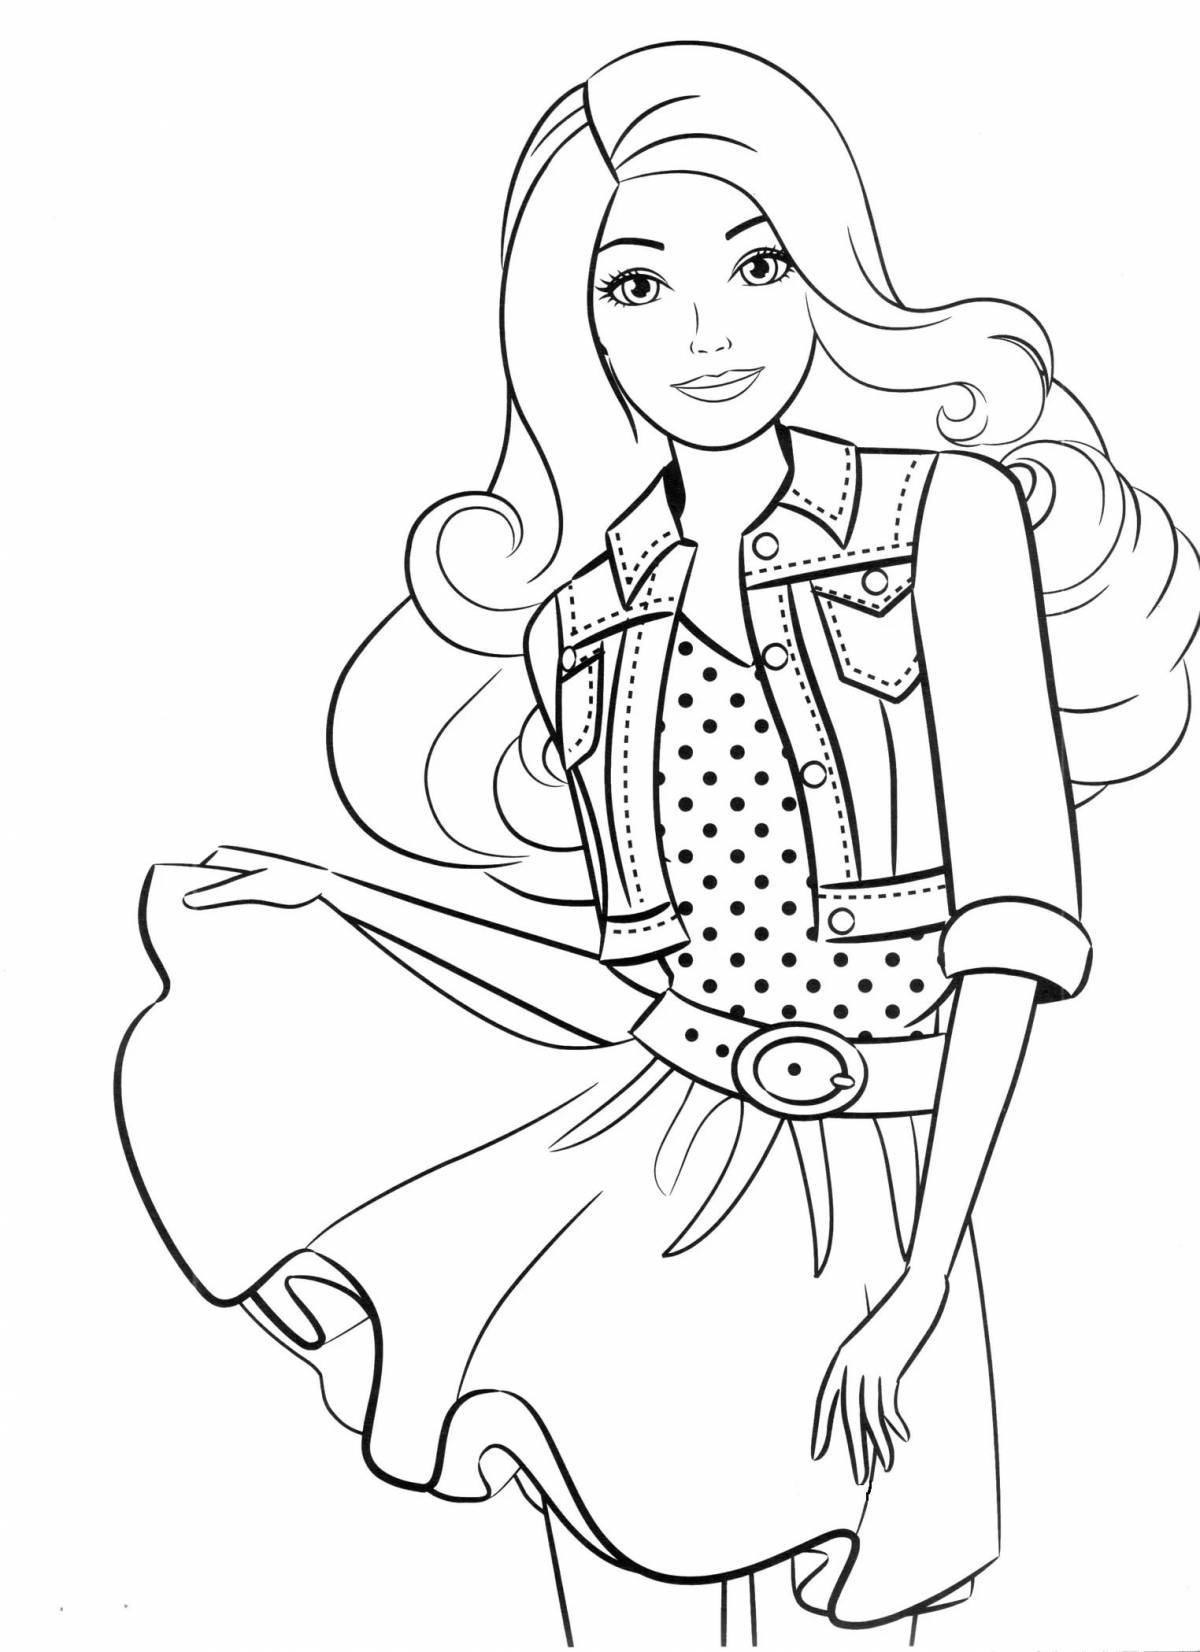 Coloring book dazzling barbie doll